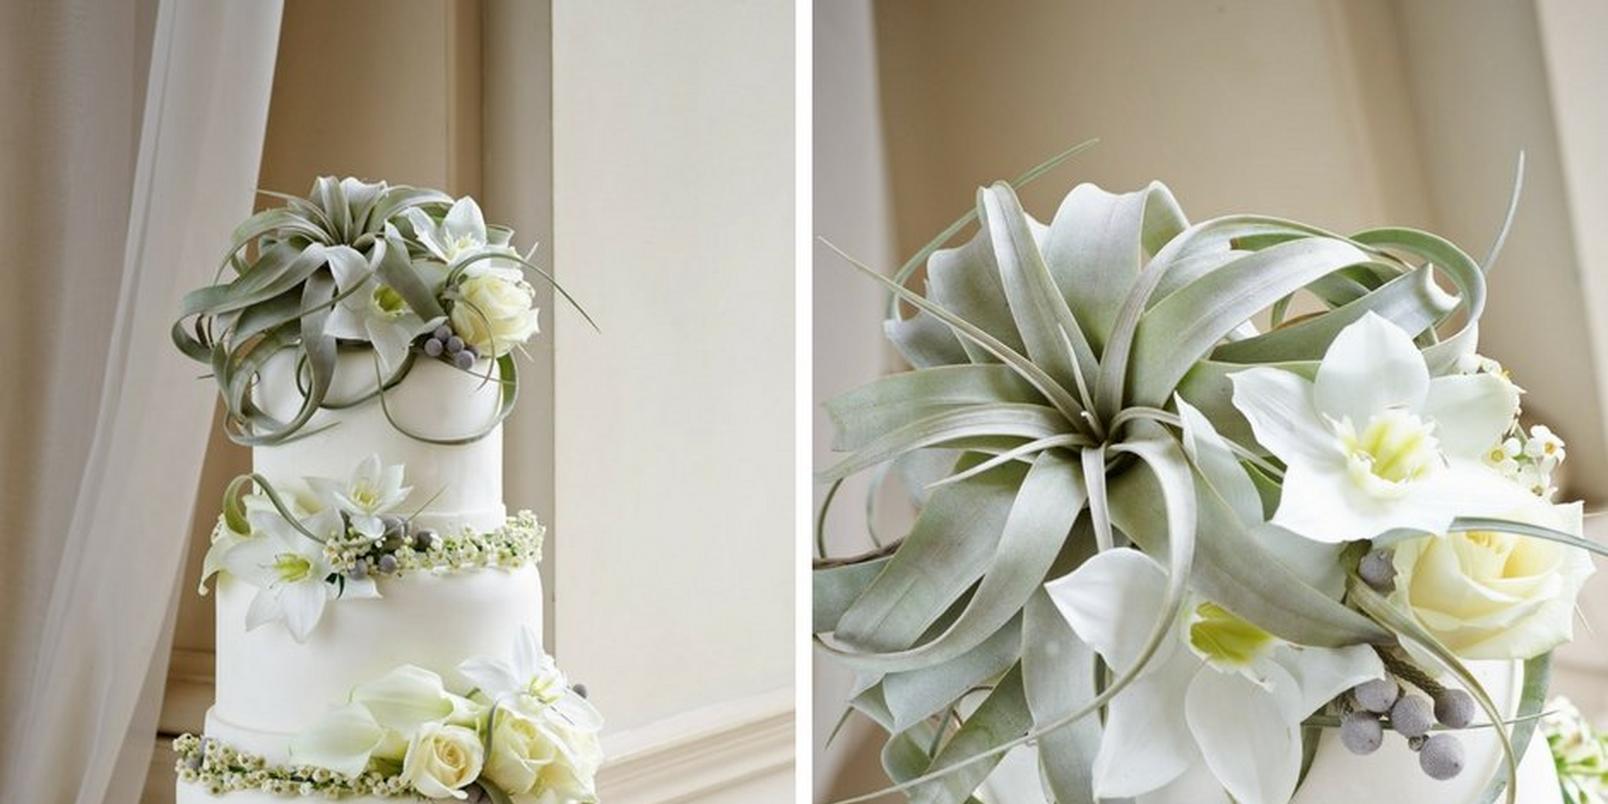 wedding-cake-ideas-with-real-flowers-5